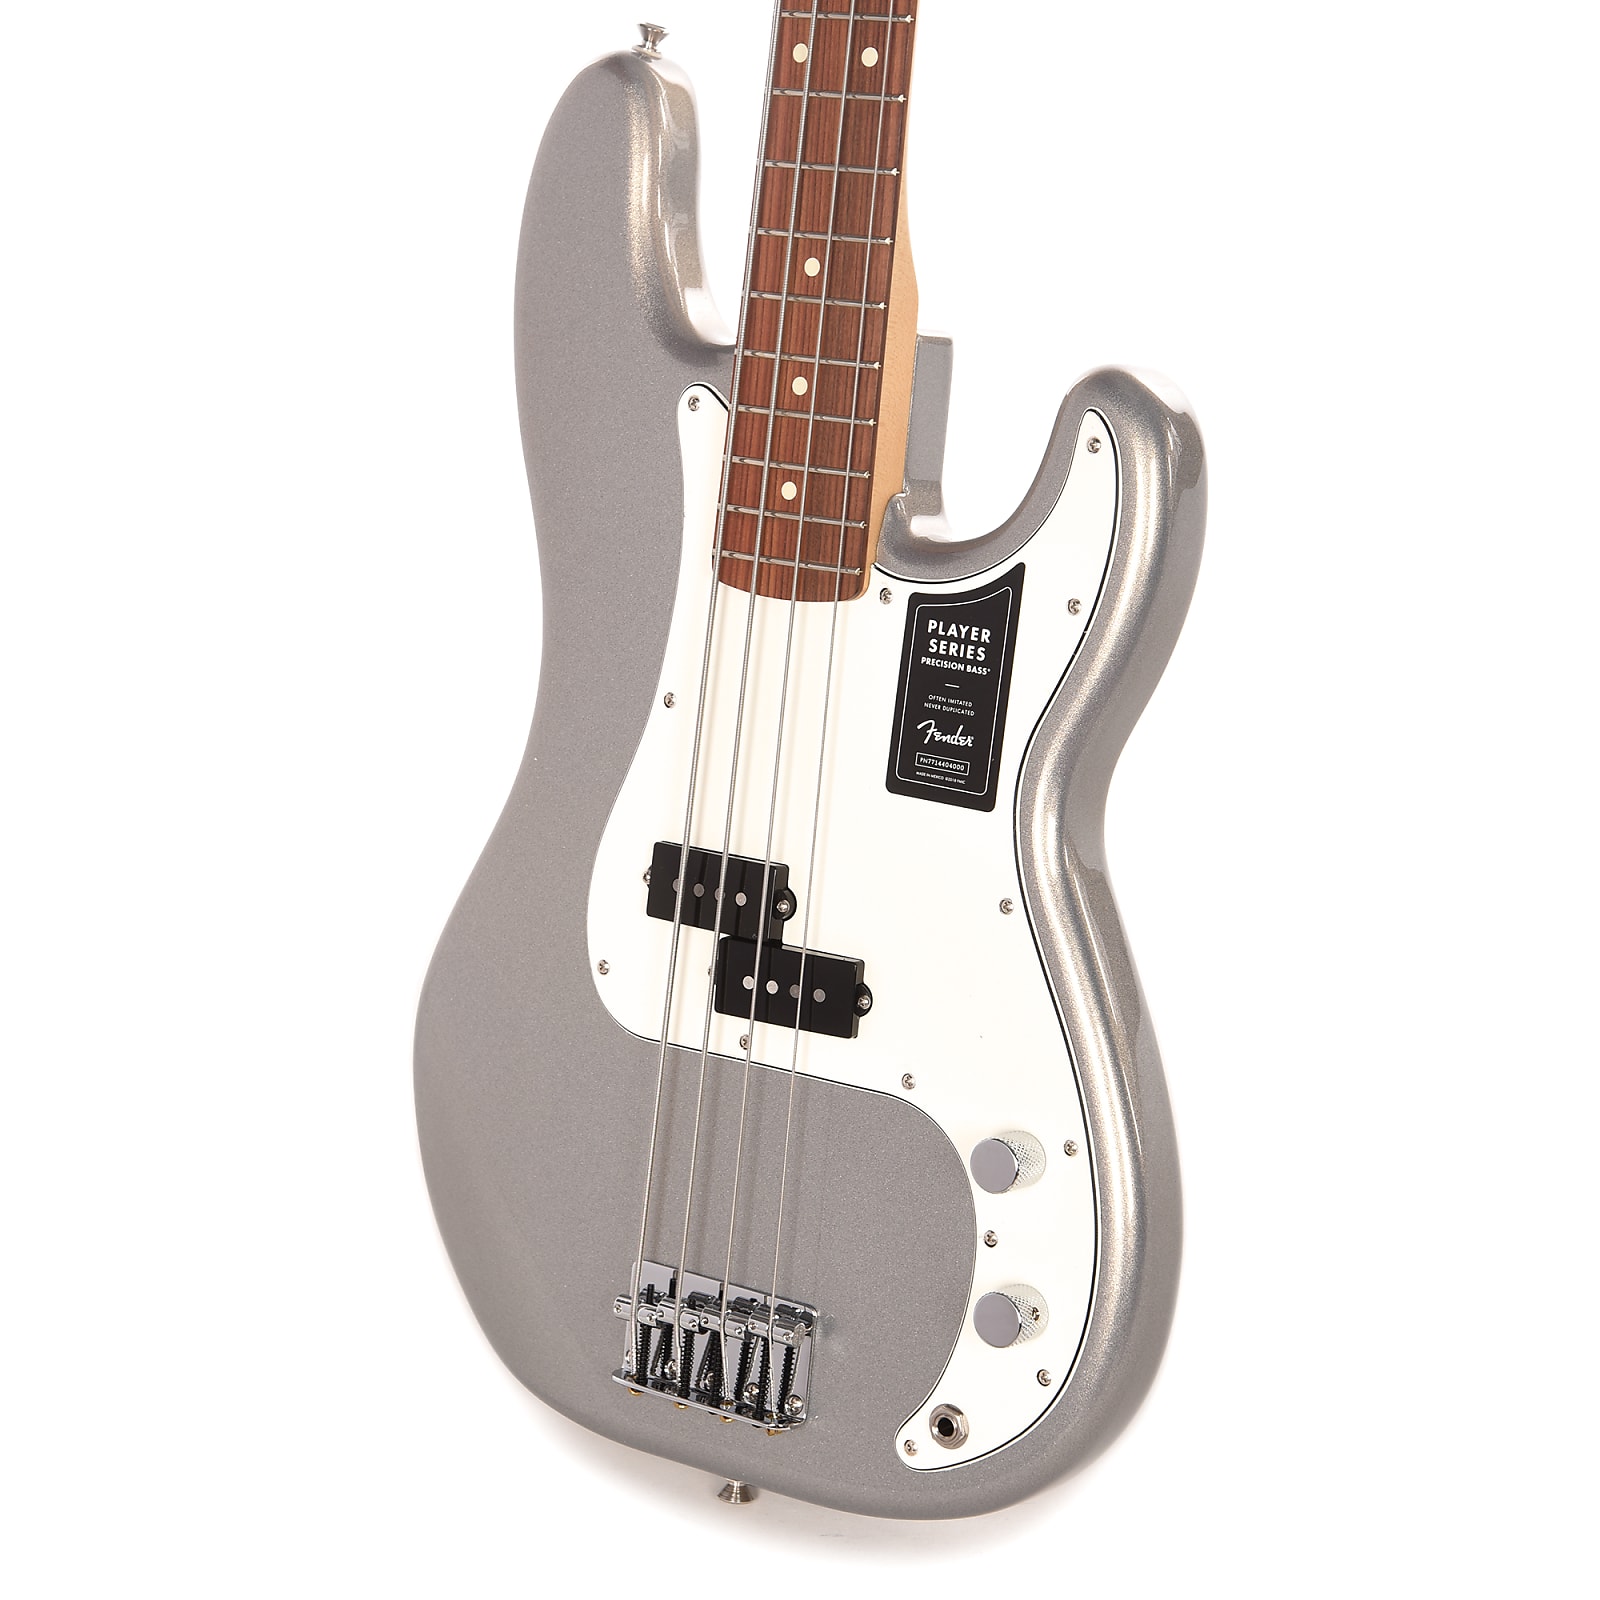 Fender Precision Bass Player Mex Pf - Silver - Solid body electric bass - Variation 1